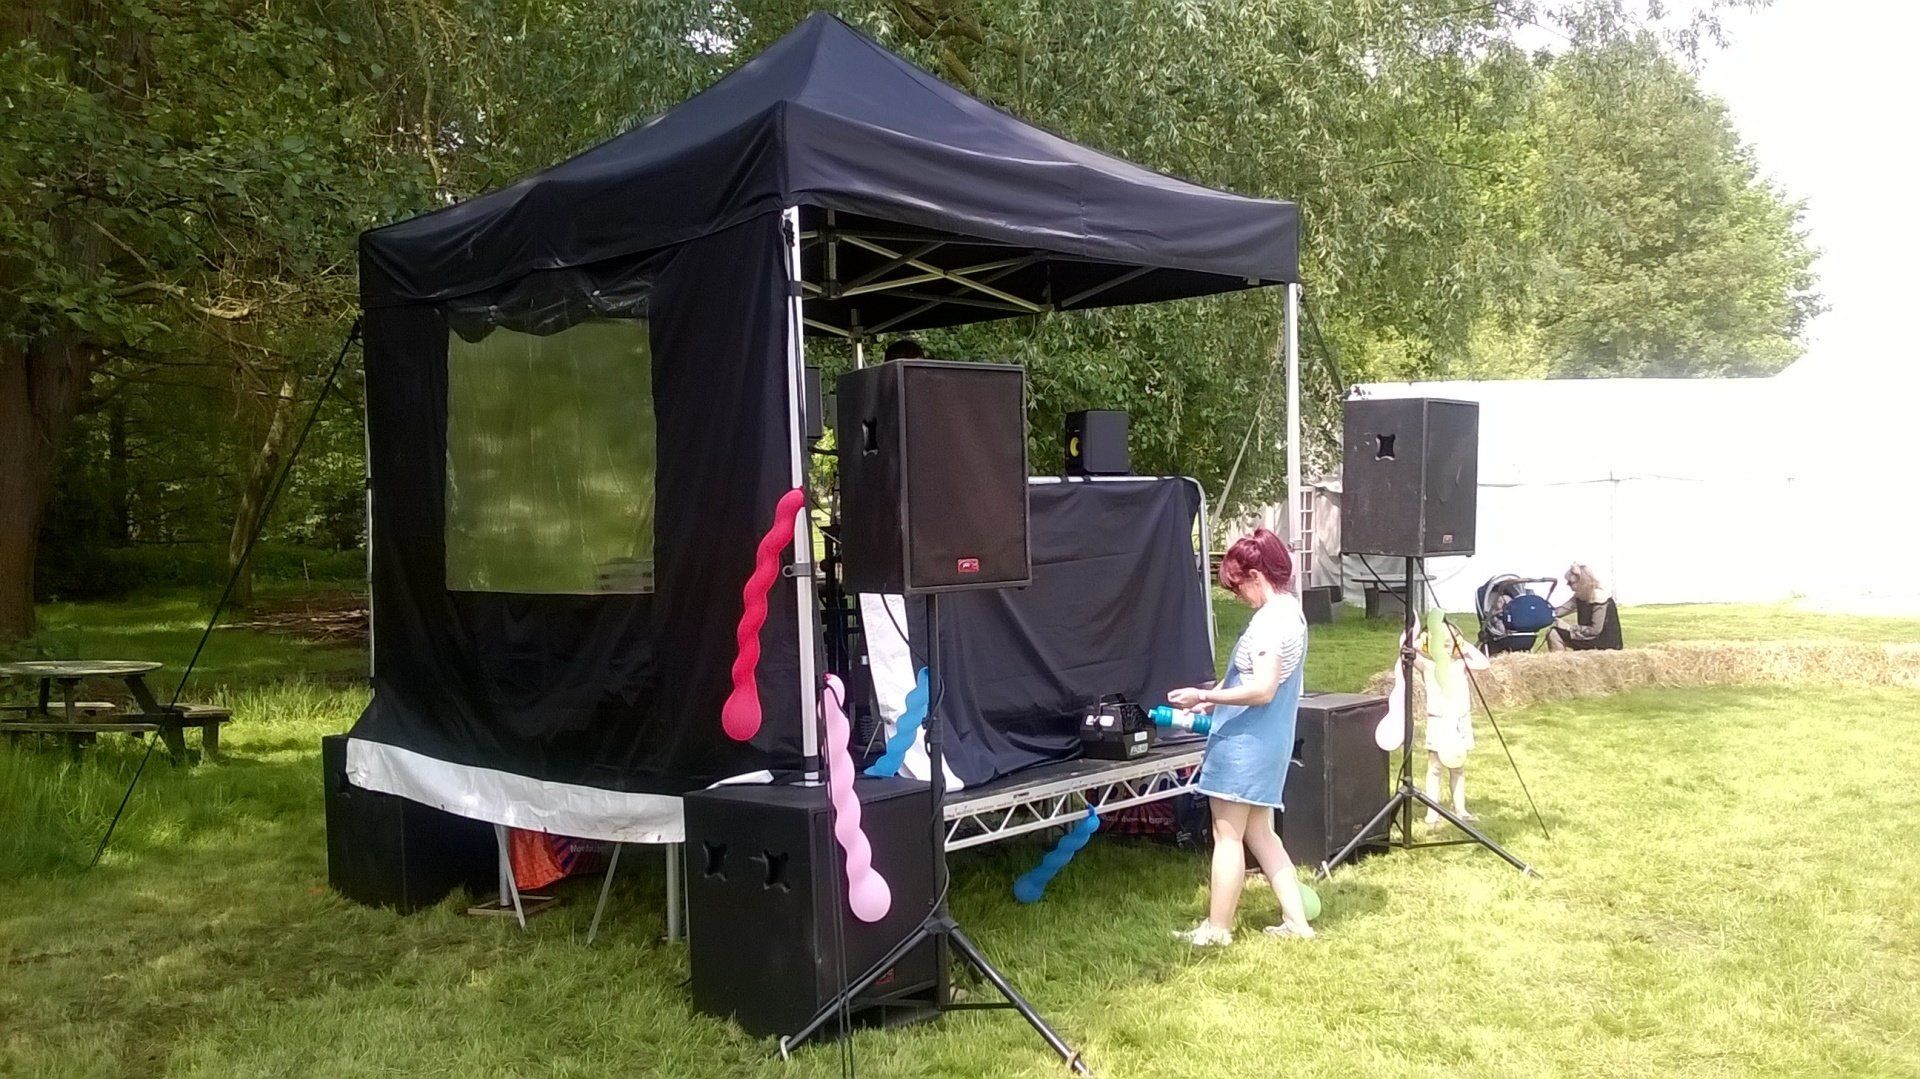 3 x 3 modular stage with gazebo canopy and PA system